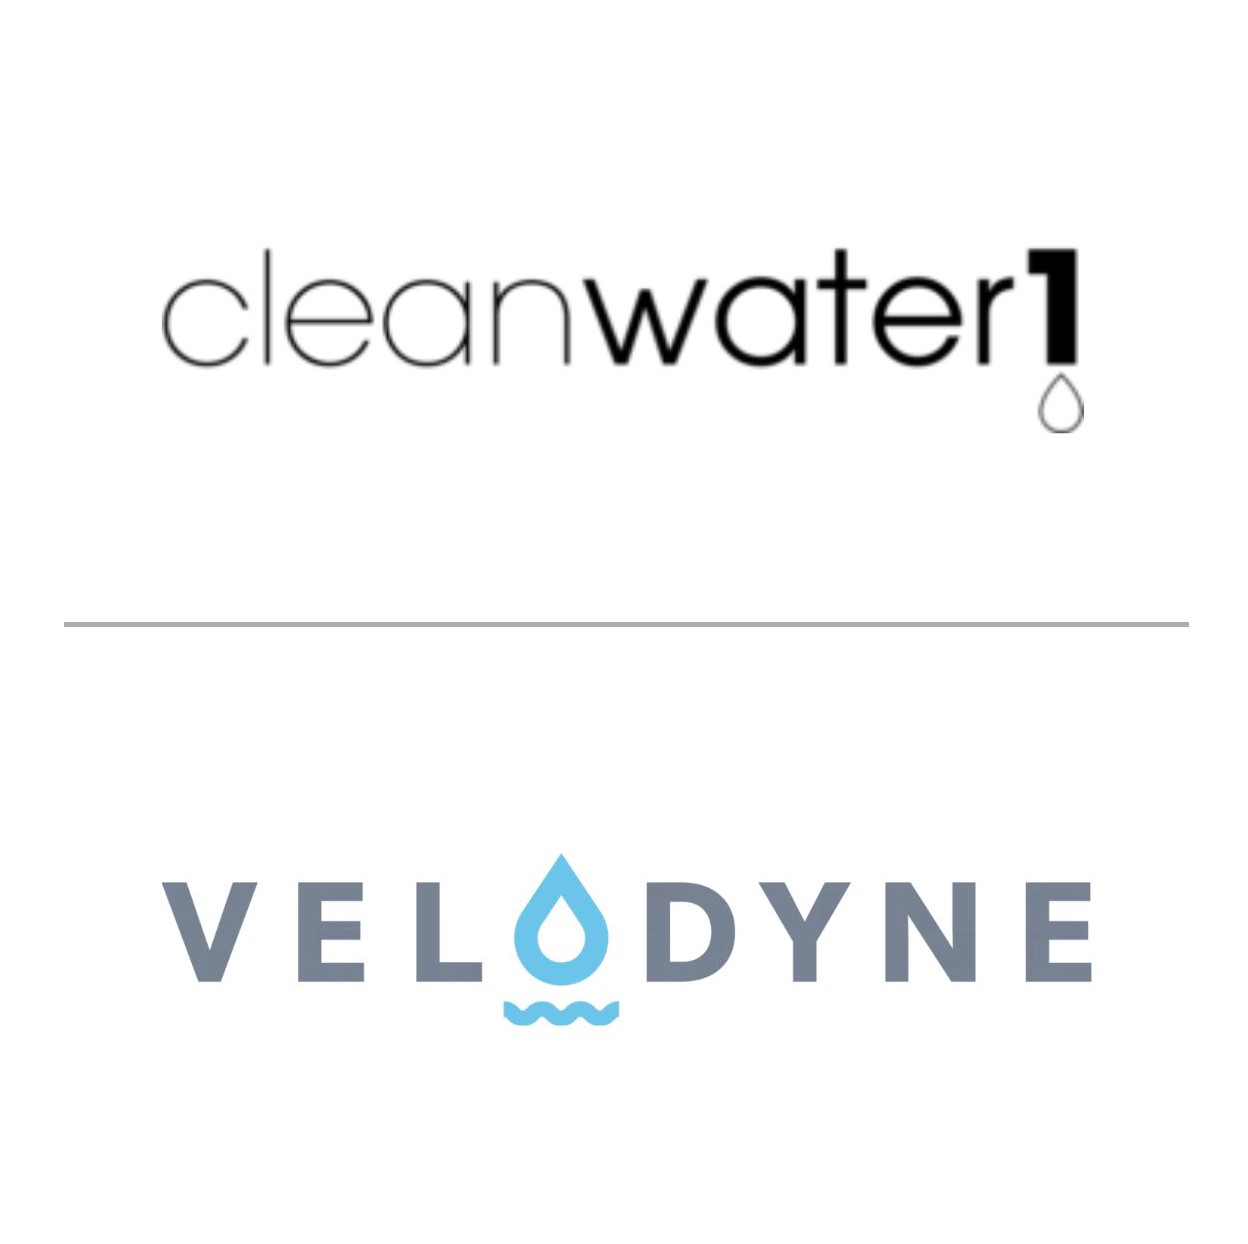 Cleanwater1 and Velodyne logos stacked with a line between images.